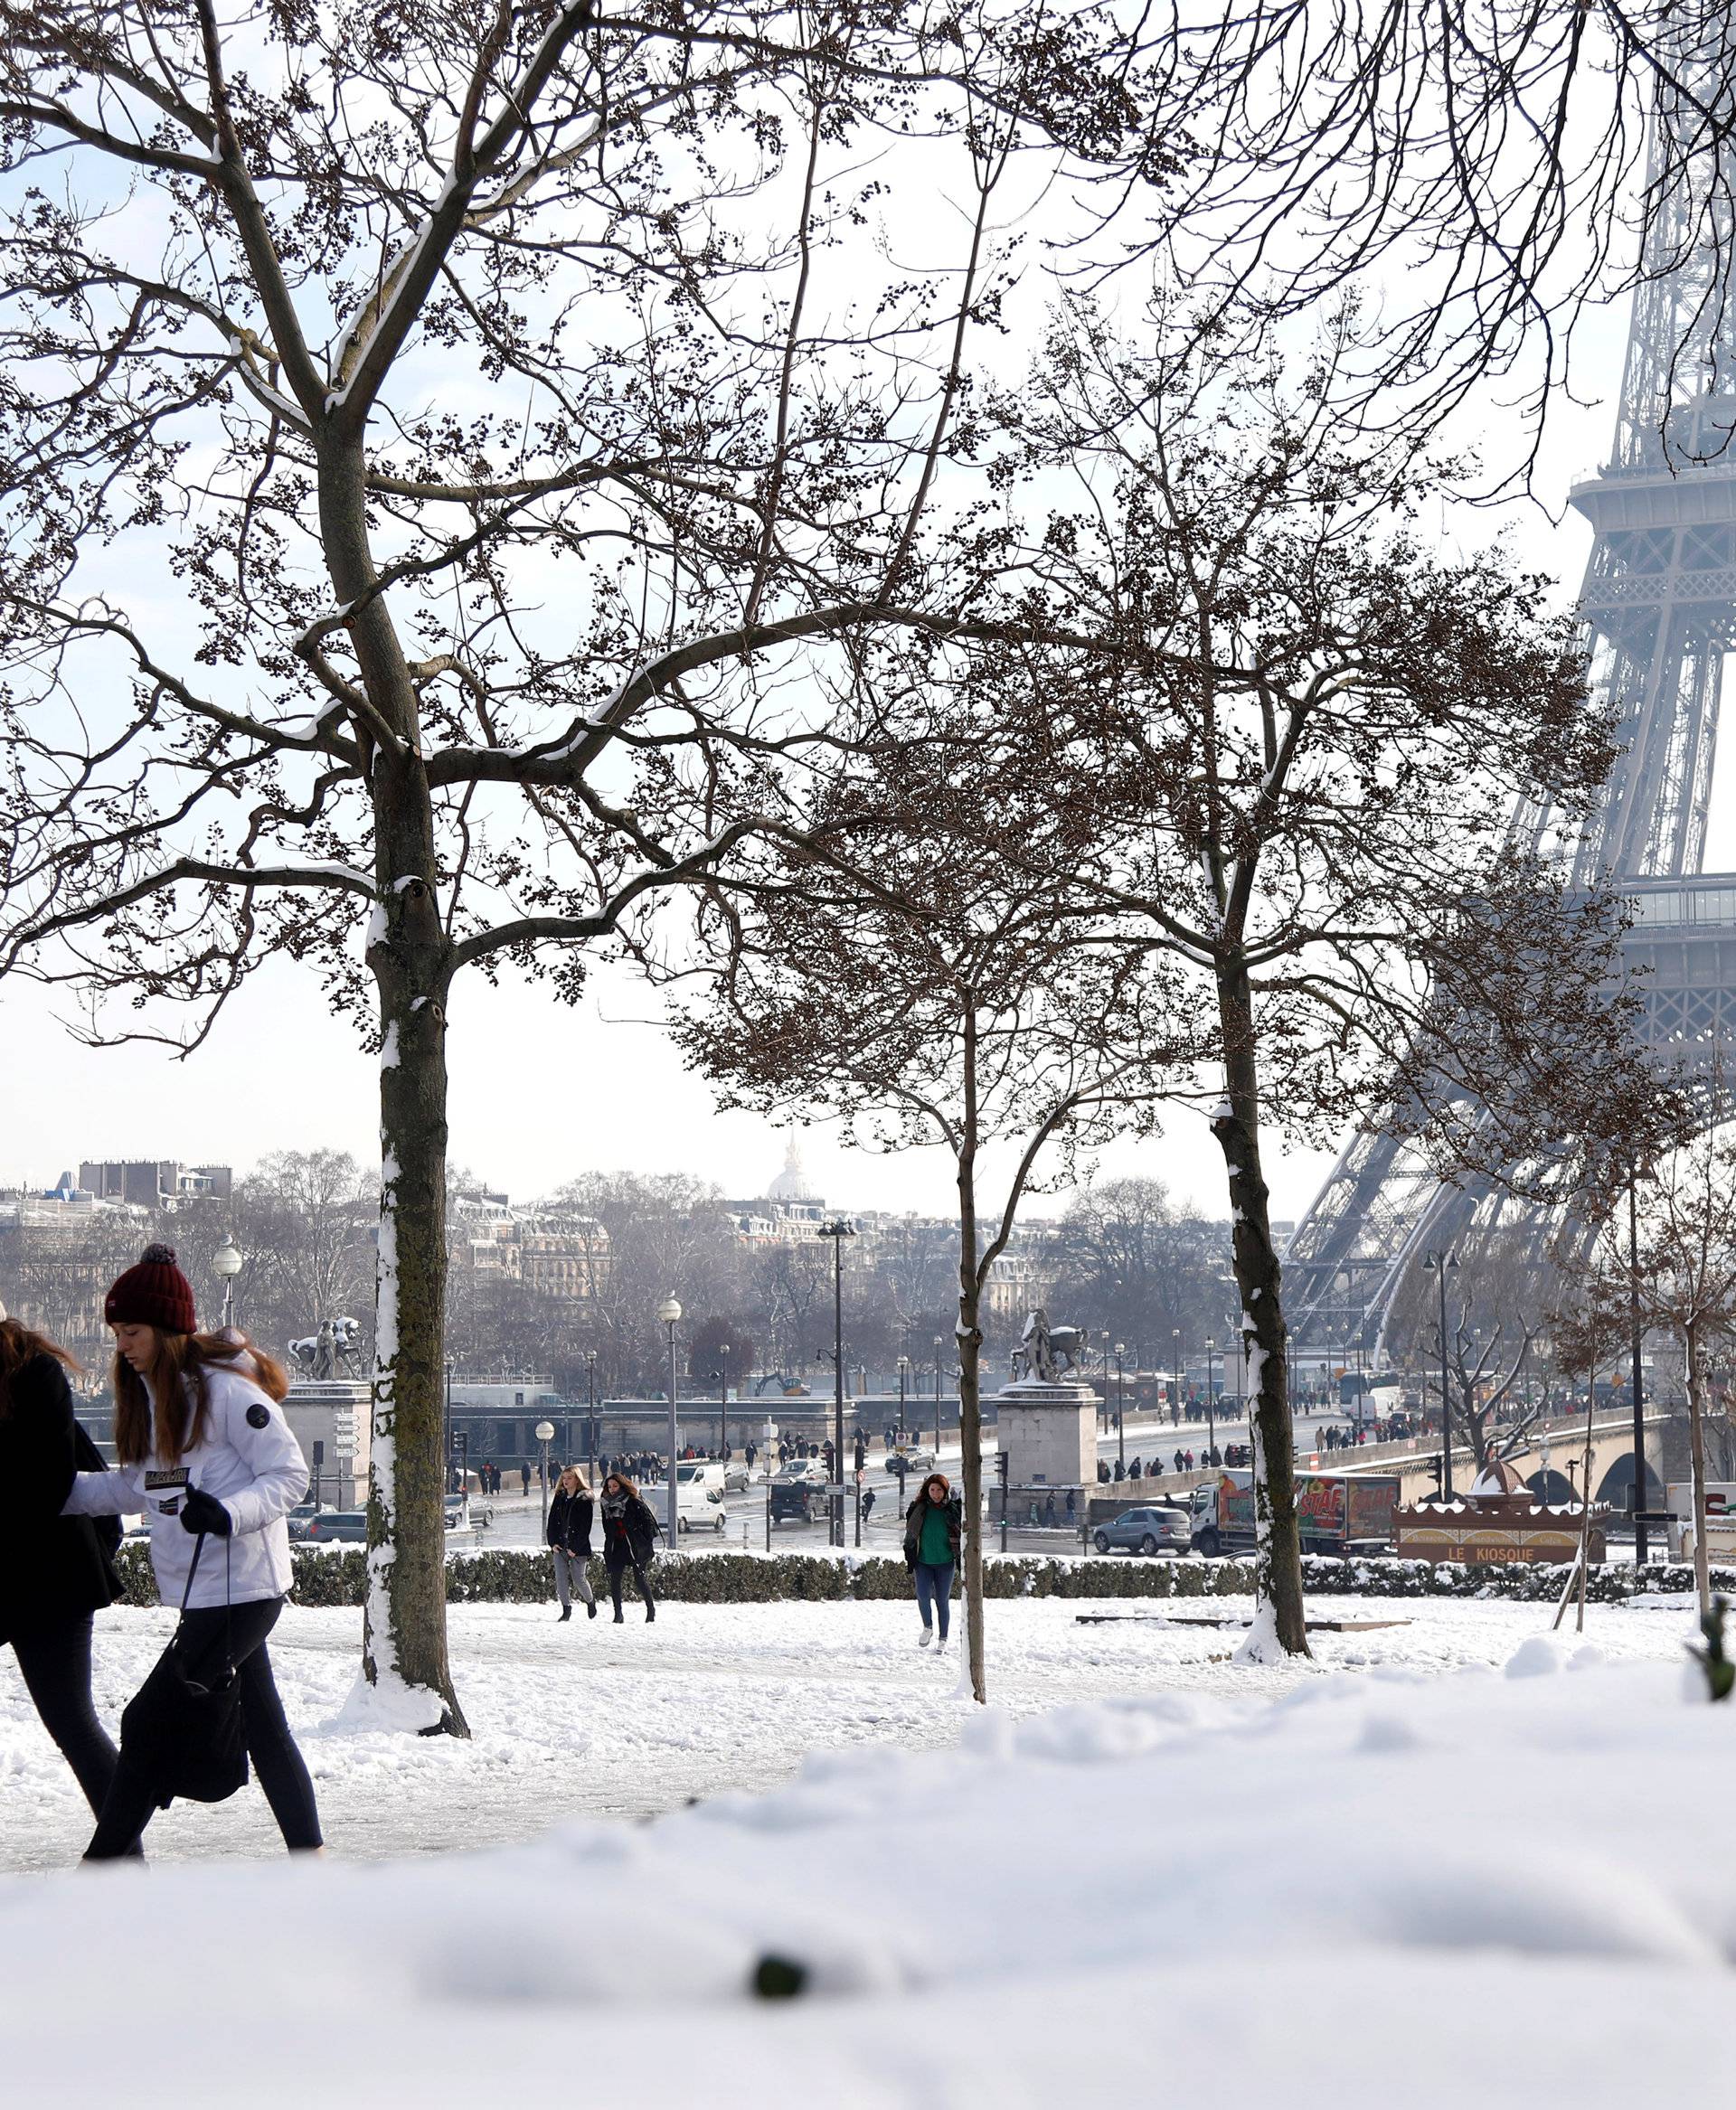 People walk on the snow-covered Trocadero gardens near the Eiffel Tower in Paris, as winter weather with snow and freezing temperatures arrive in France